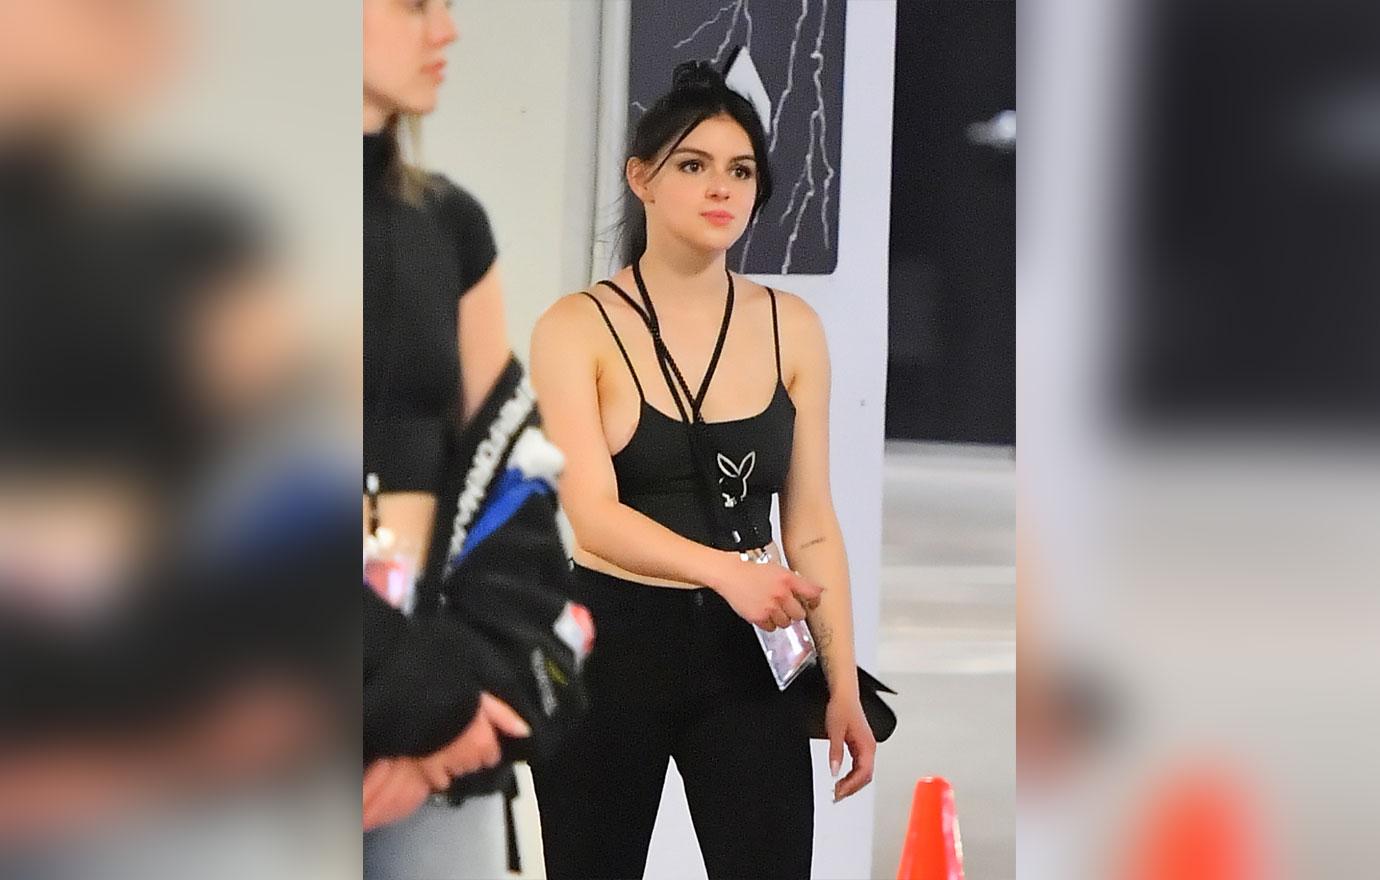 Ariel Winter Suffers A Nip Slip While Out About In Los Angeles.